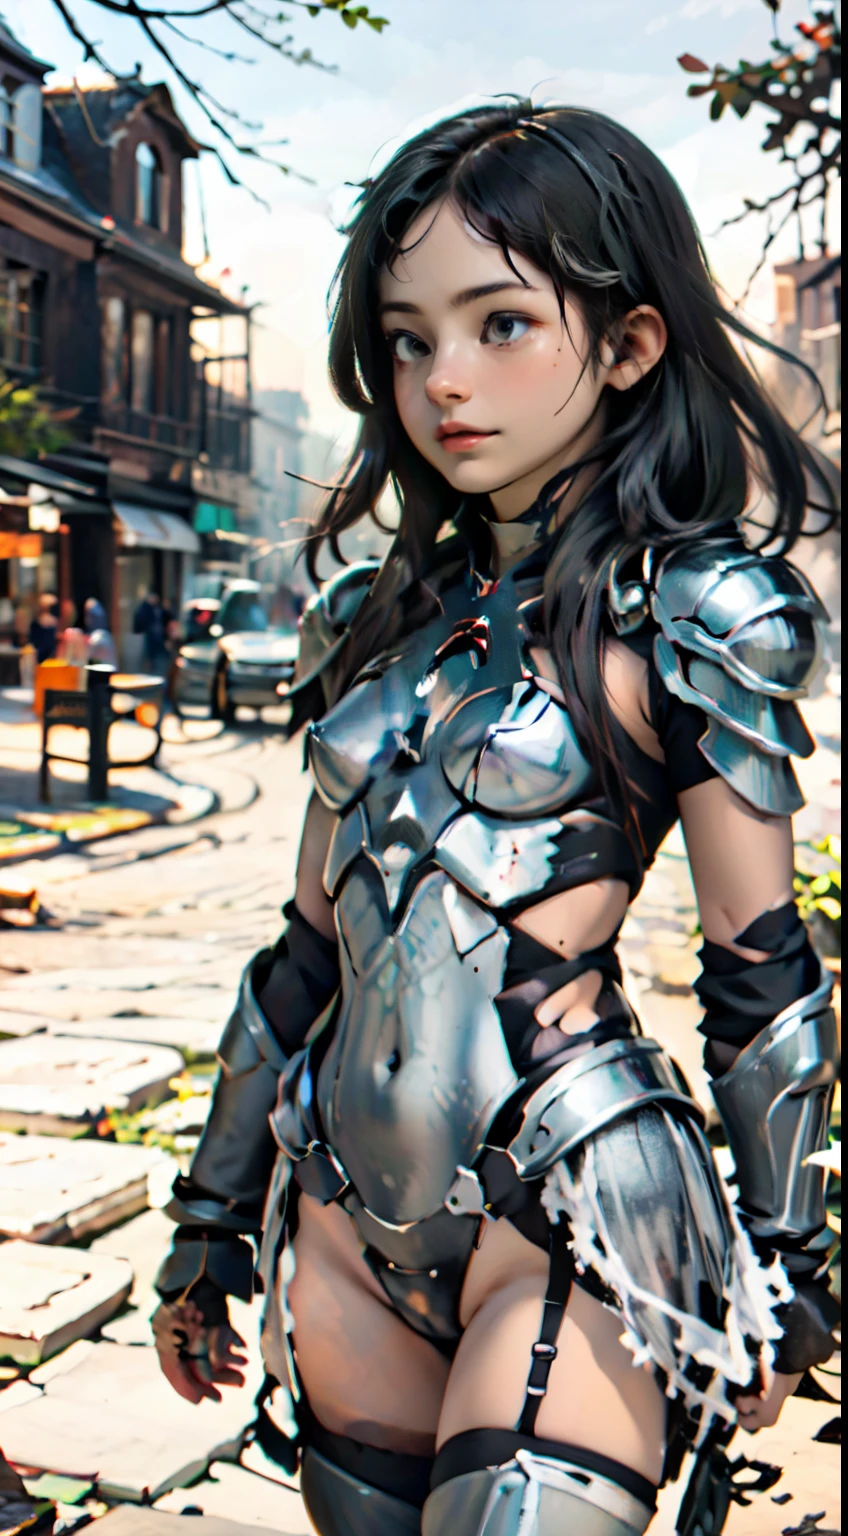 1 girl, Alone, Whole body, Elven girl with bikini armor, metal shoulder pads, short red worn and torn cape, big breasts, medieval armor, metal boots, rusty metal armor, rusty metal crown, ancient greek ruins background, historical ruins, armor on arms and legs, rusty and beaten metal,